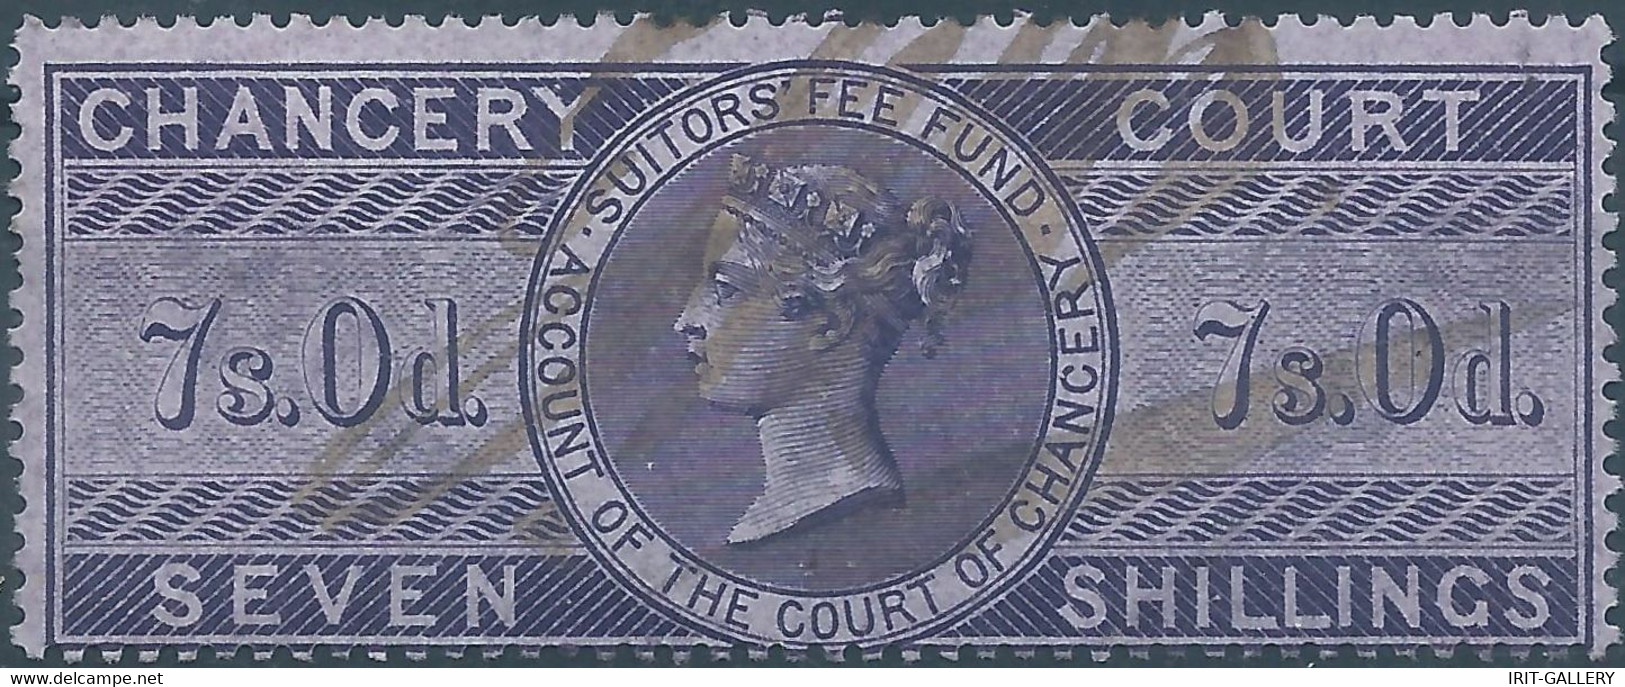 Great Britain-ENGLAND,Queen Victoria,1855 /1870 Revenue Stamp Tax Fiscal CHANCERY COURT,7s.0d. Seven Shillings,Used - Fiscales